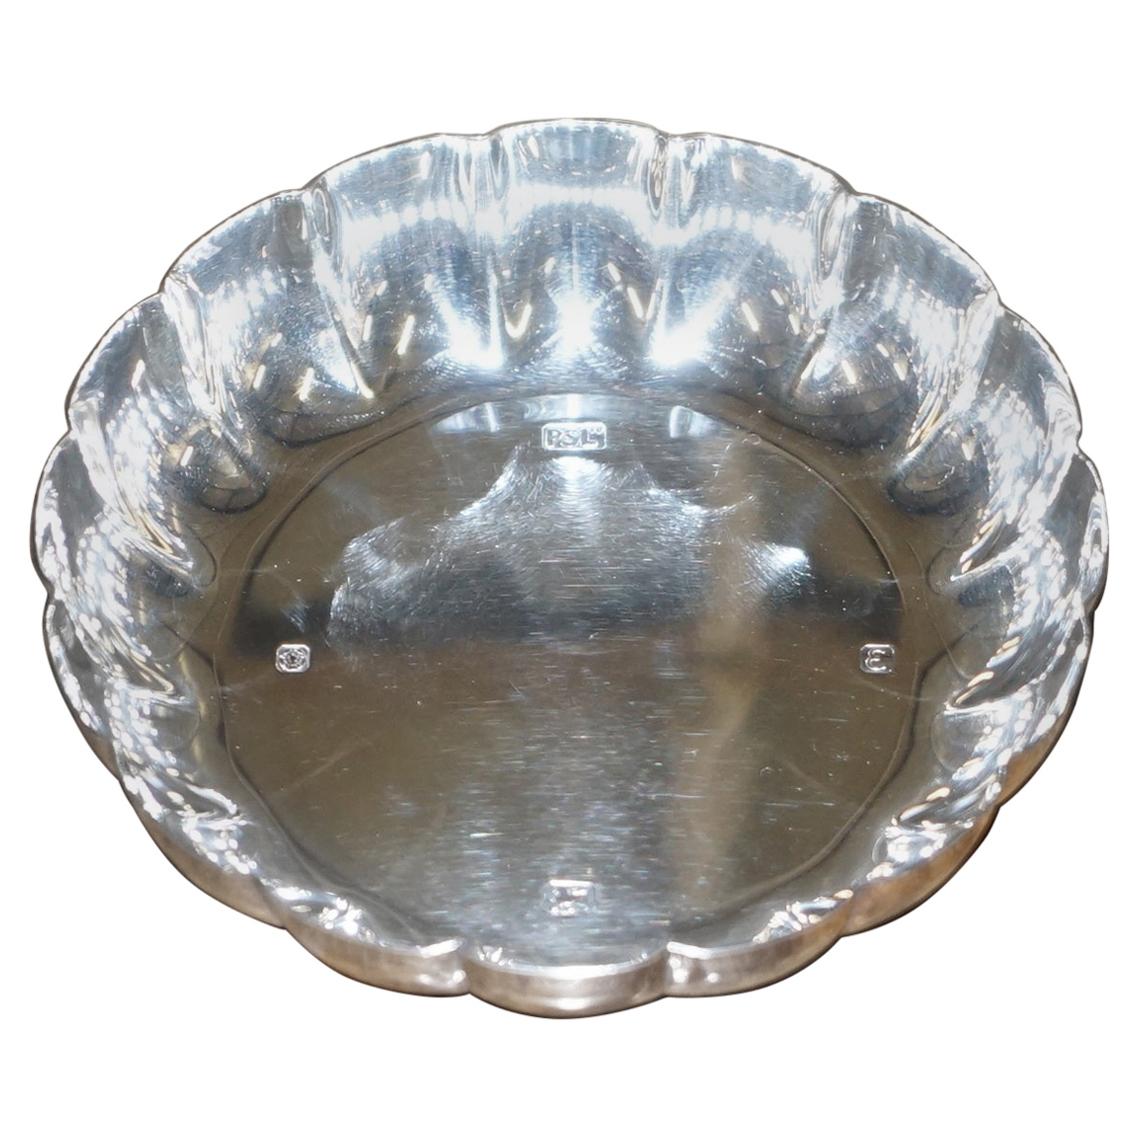 Stunning Rare 1979 Solid Sterling Silver Strawberry Dish or Bowl from Sheffield For Sale